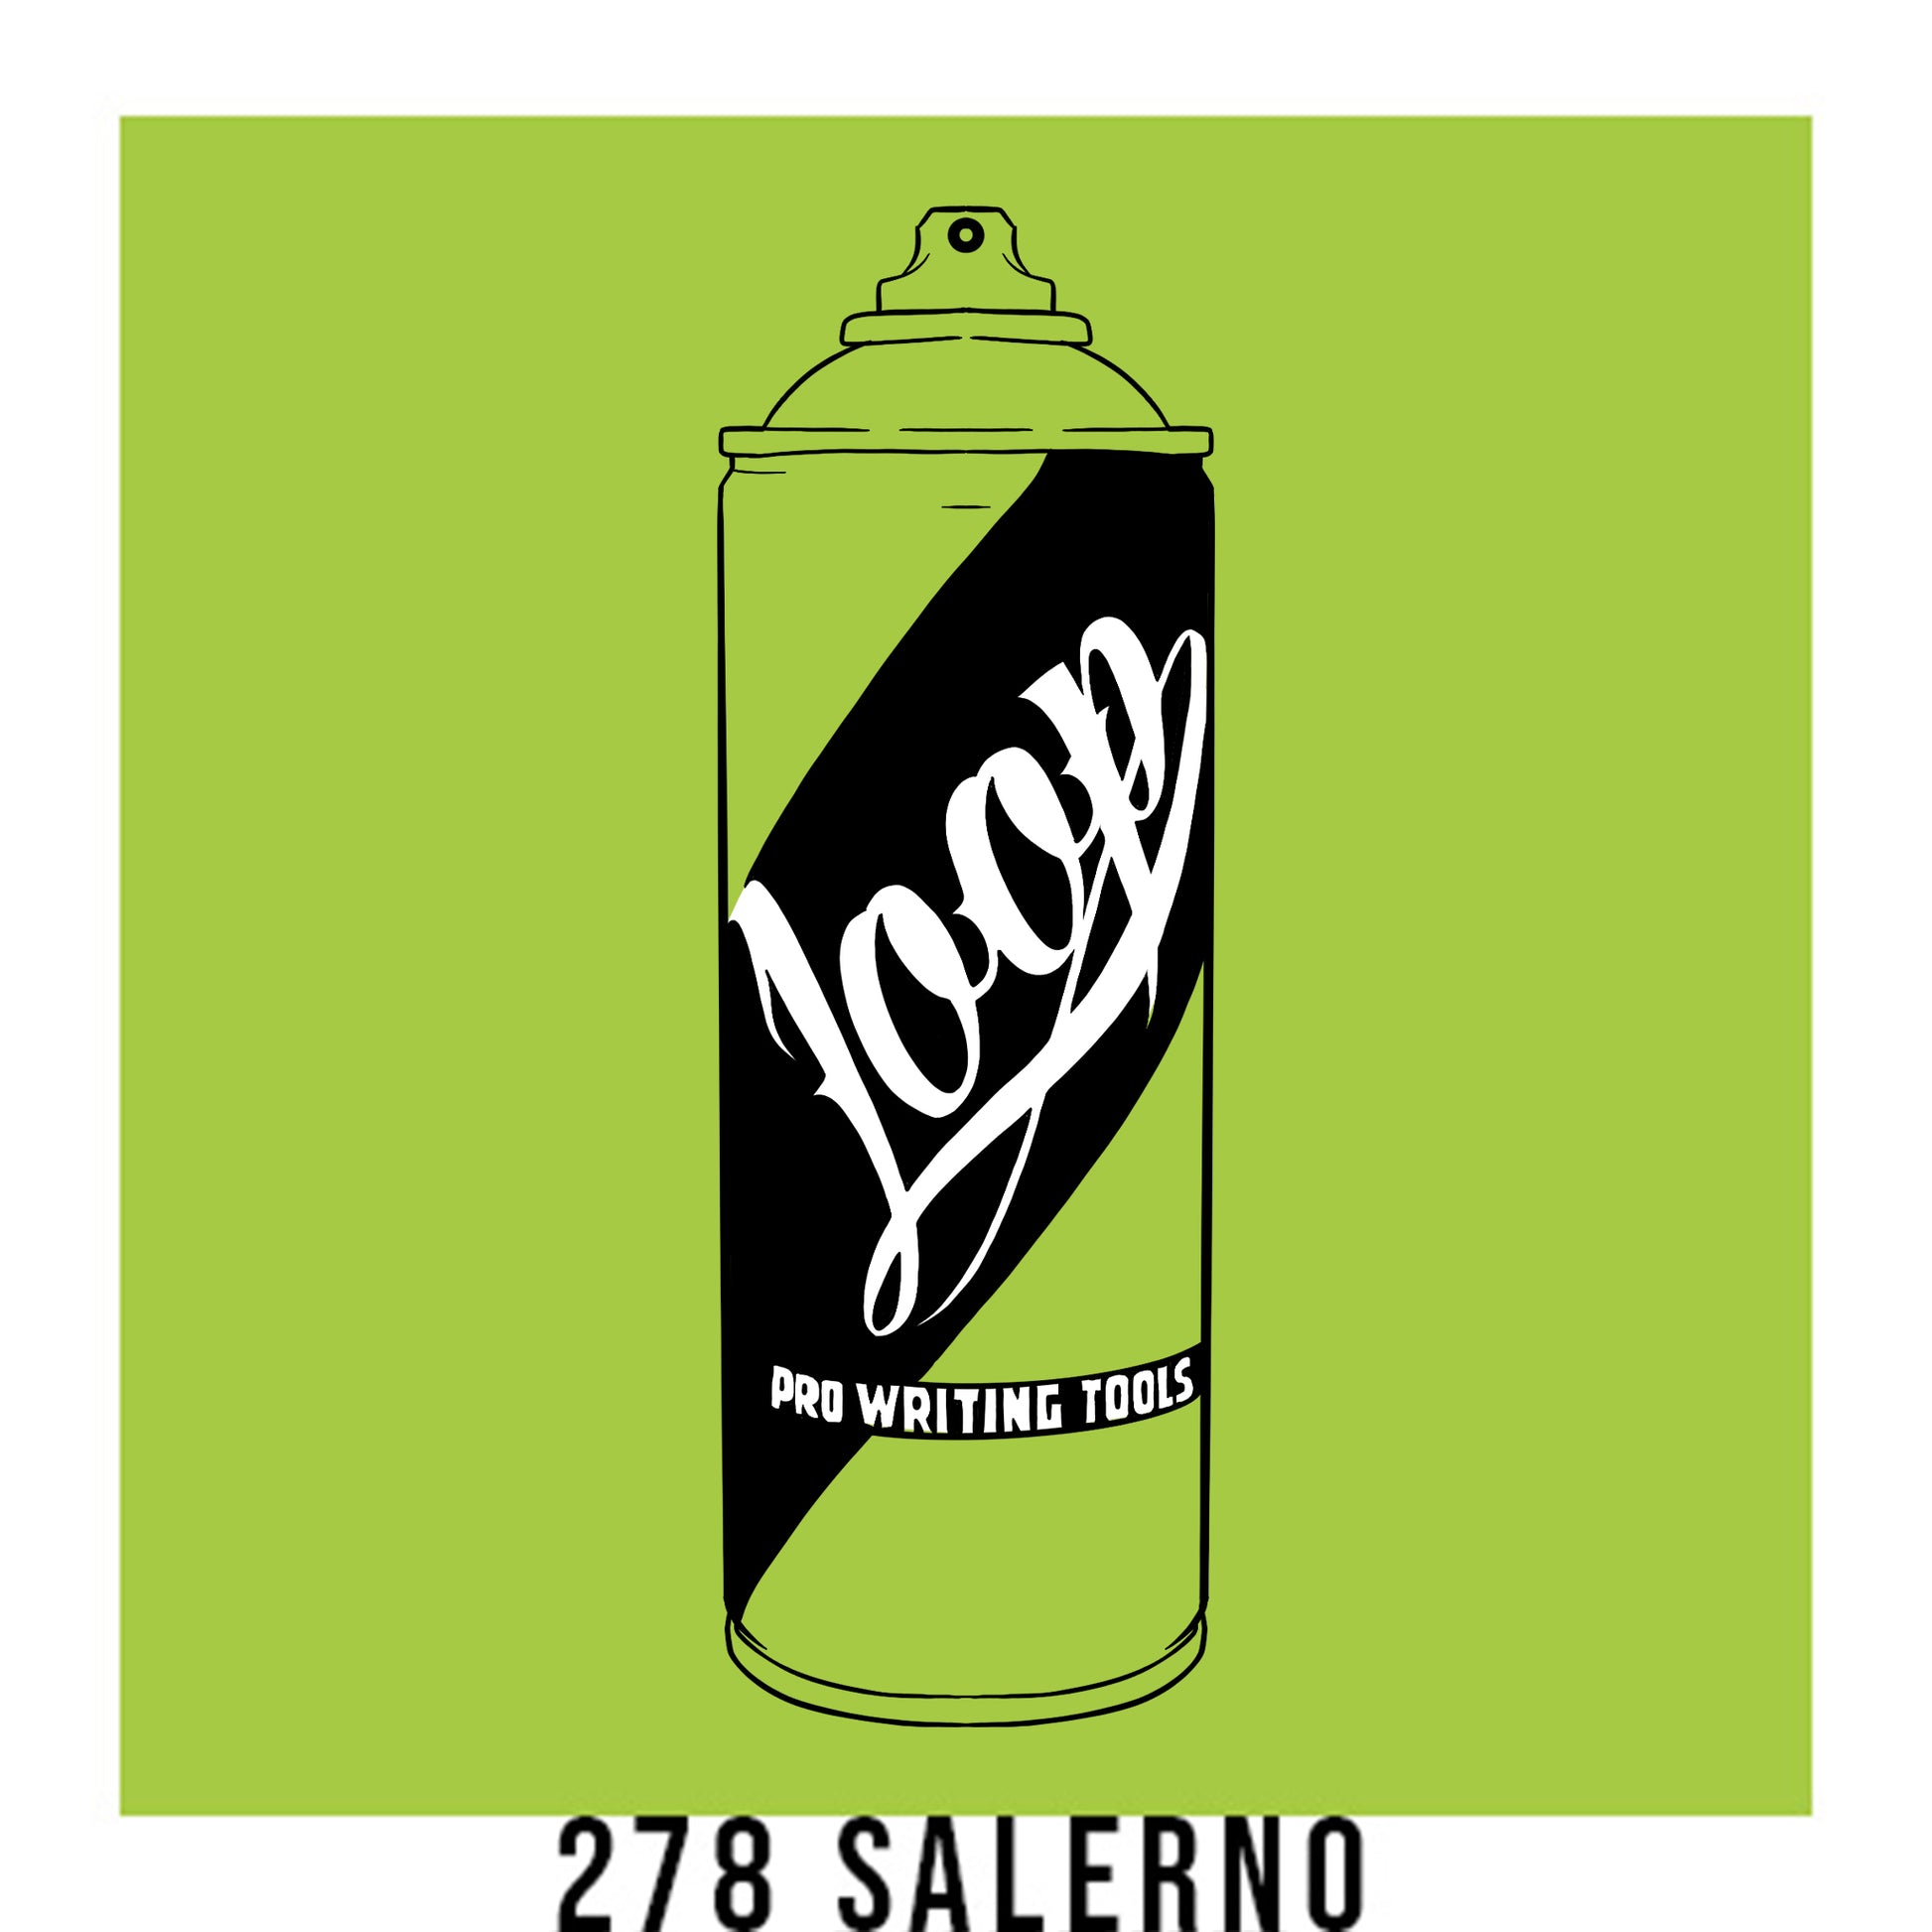 A black outline drawing of a Lime Green spray paint can with the word "Loop" written on the face in script. The background is a color swatch of the same lime Green with a white border with the words "278 Salerno" at the bottom.